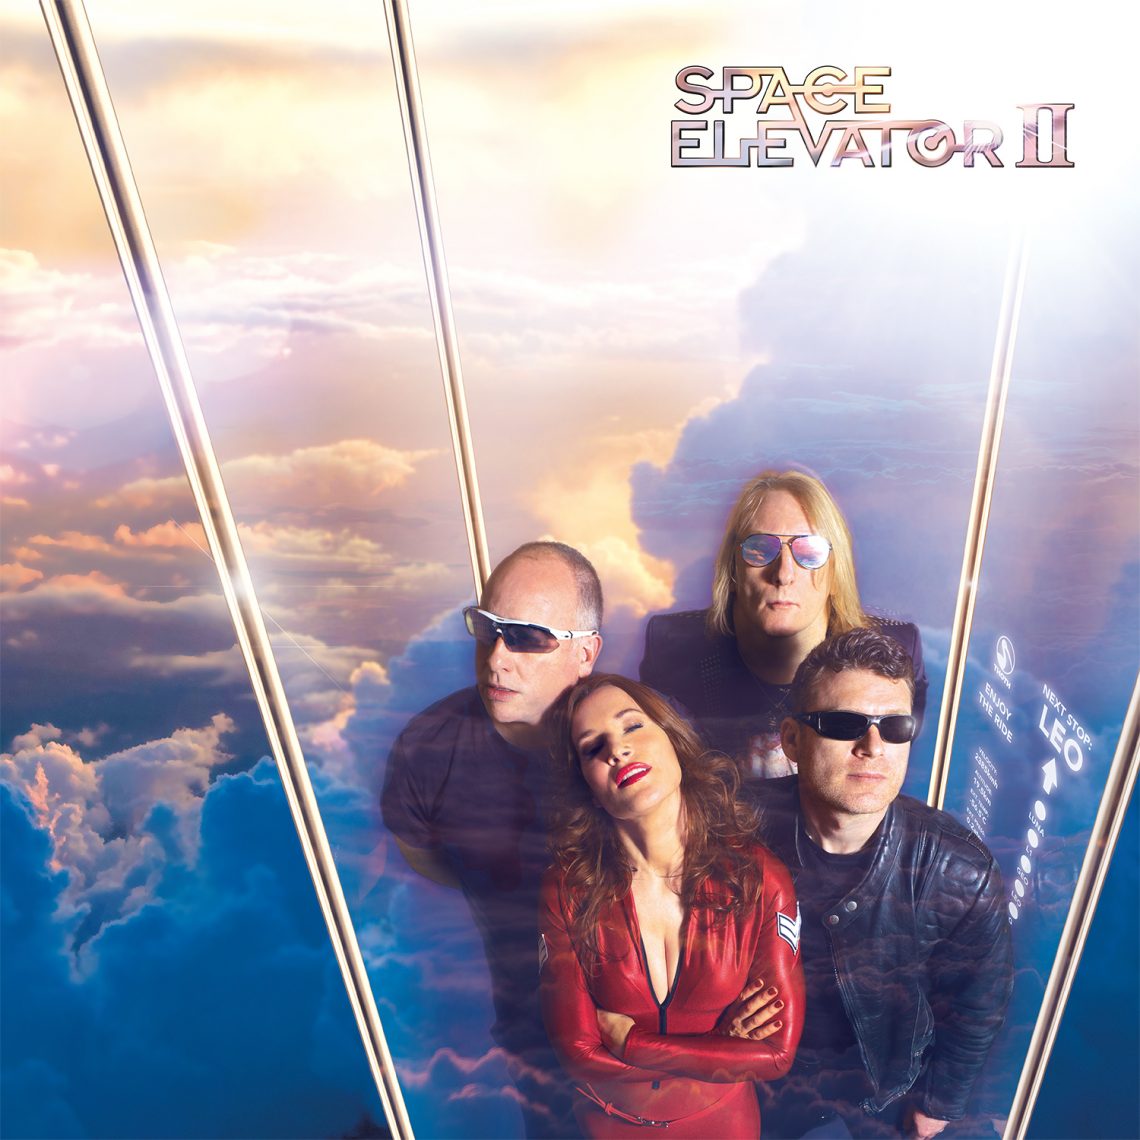 SPACE ELEVATOR release new single & video today!